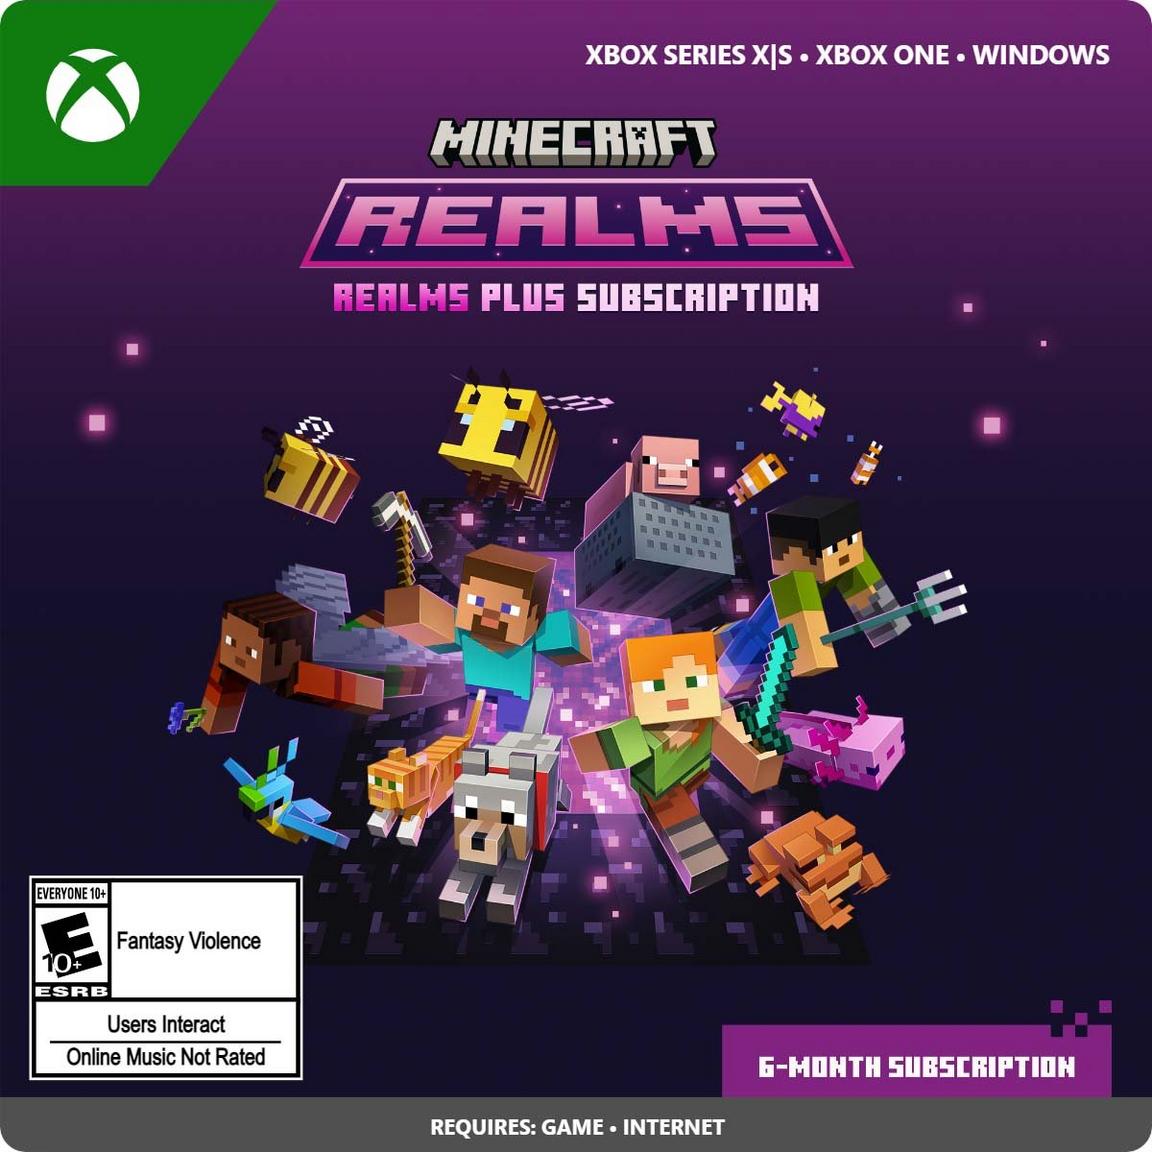 Microsoft Minecraft Realms Plus 6-Month Subscription - Xbox One, Xbox Series X/S, and Windows -  7LM-00050